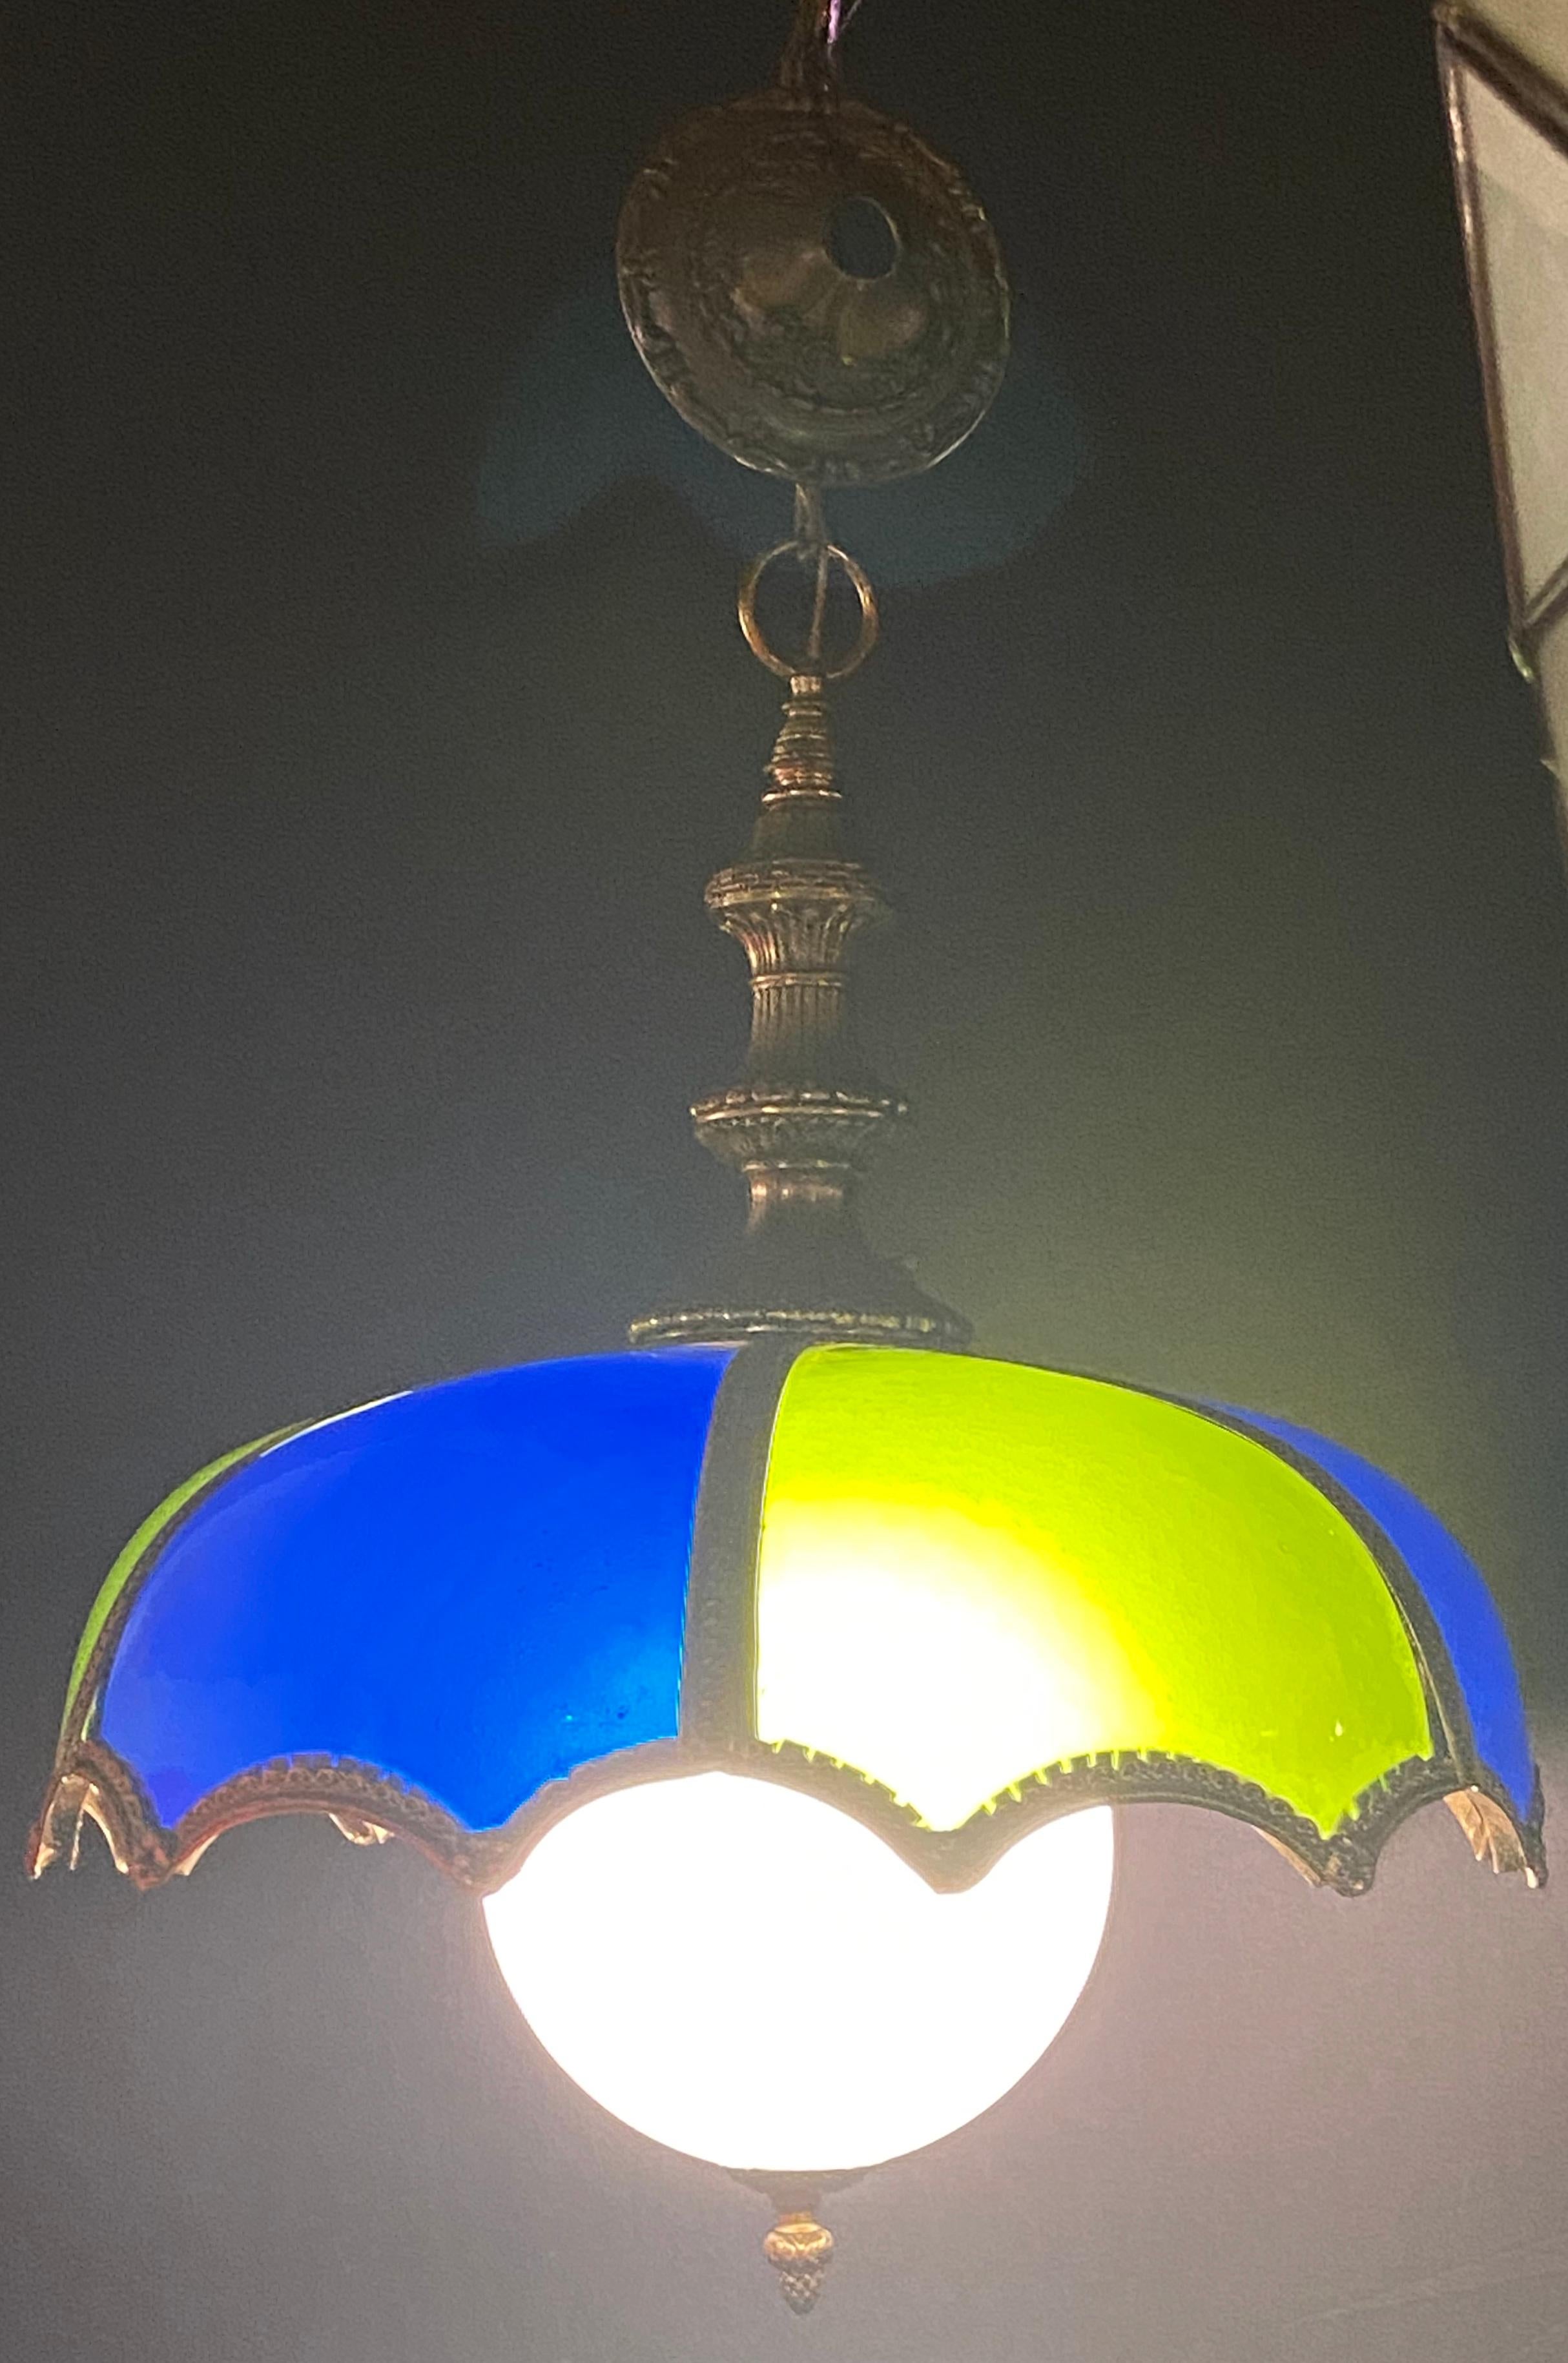 Stained glass dome shaped bronze framed MCM Italian light with canopy

A stylish blue and green stained glass and bronze framed Italian chandelier or pendant. The chandelier features a dome shaped and bronze canopy. It will hang beautifully on